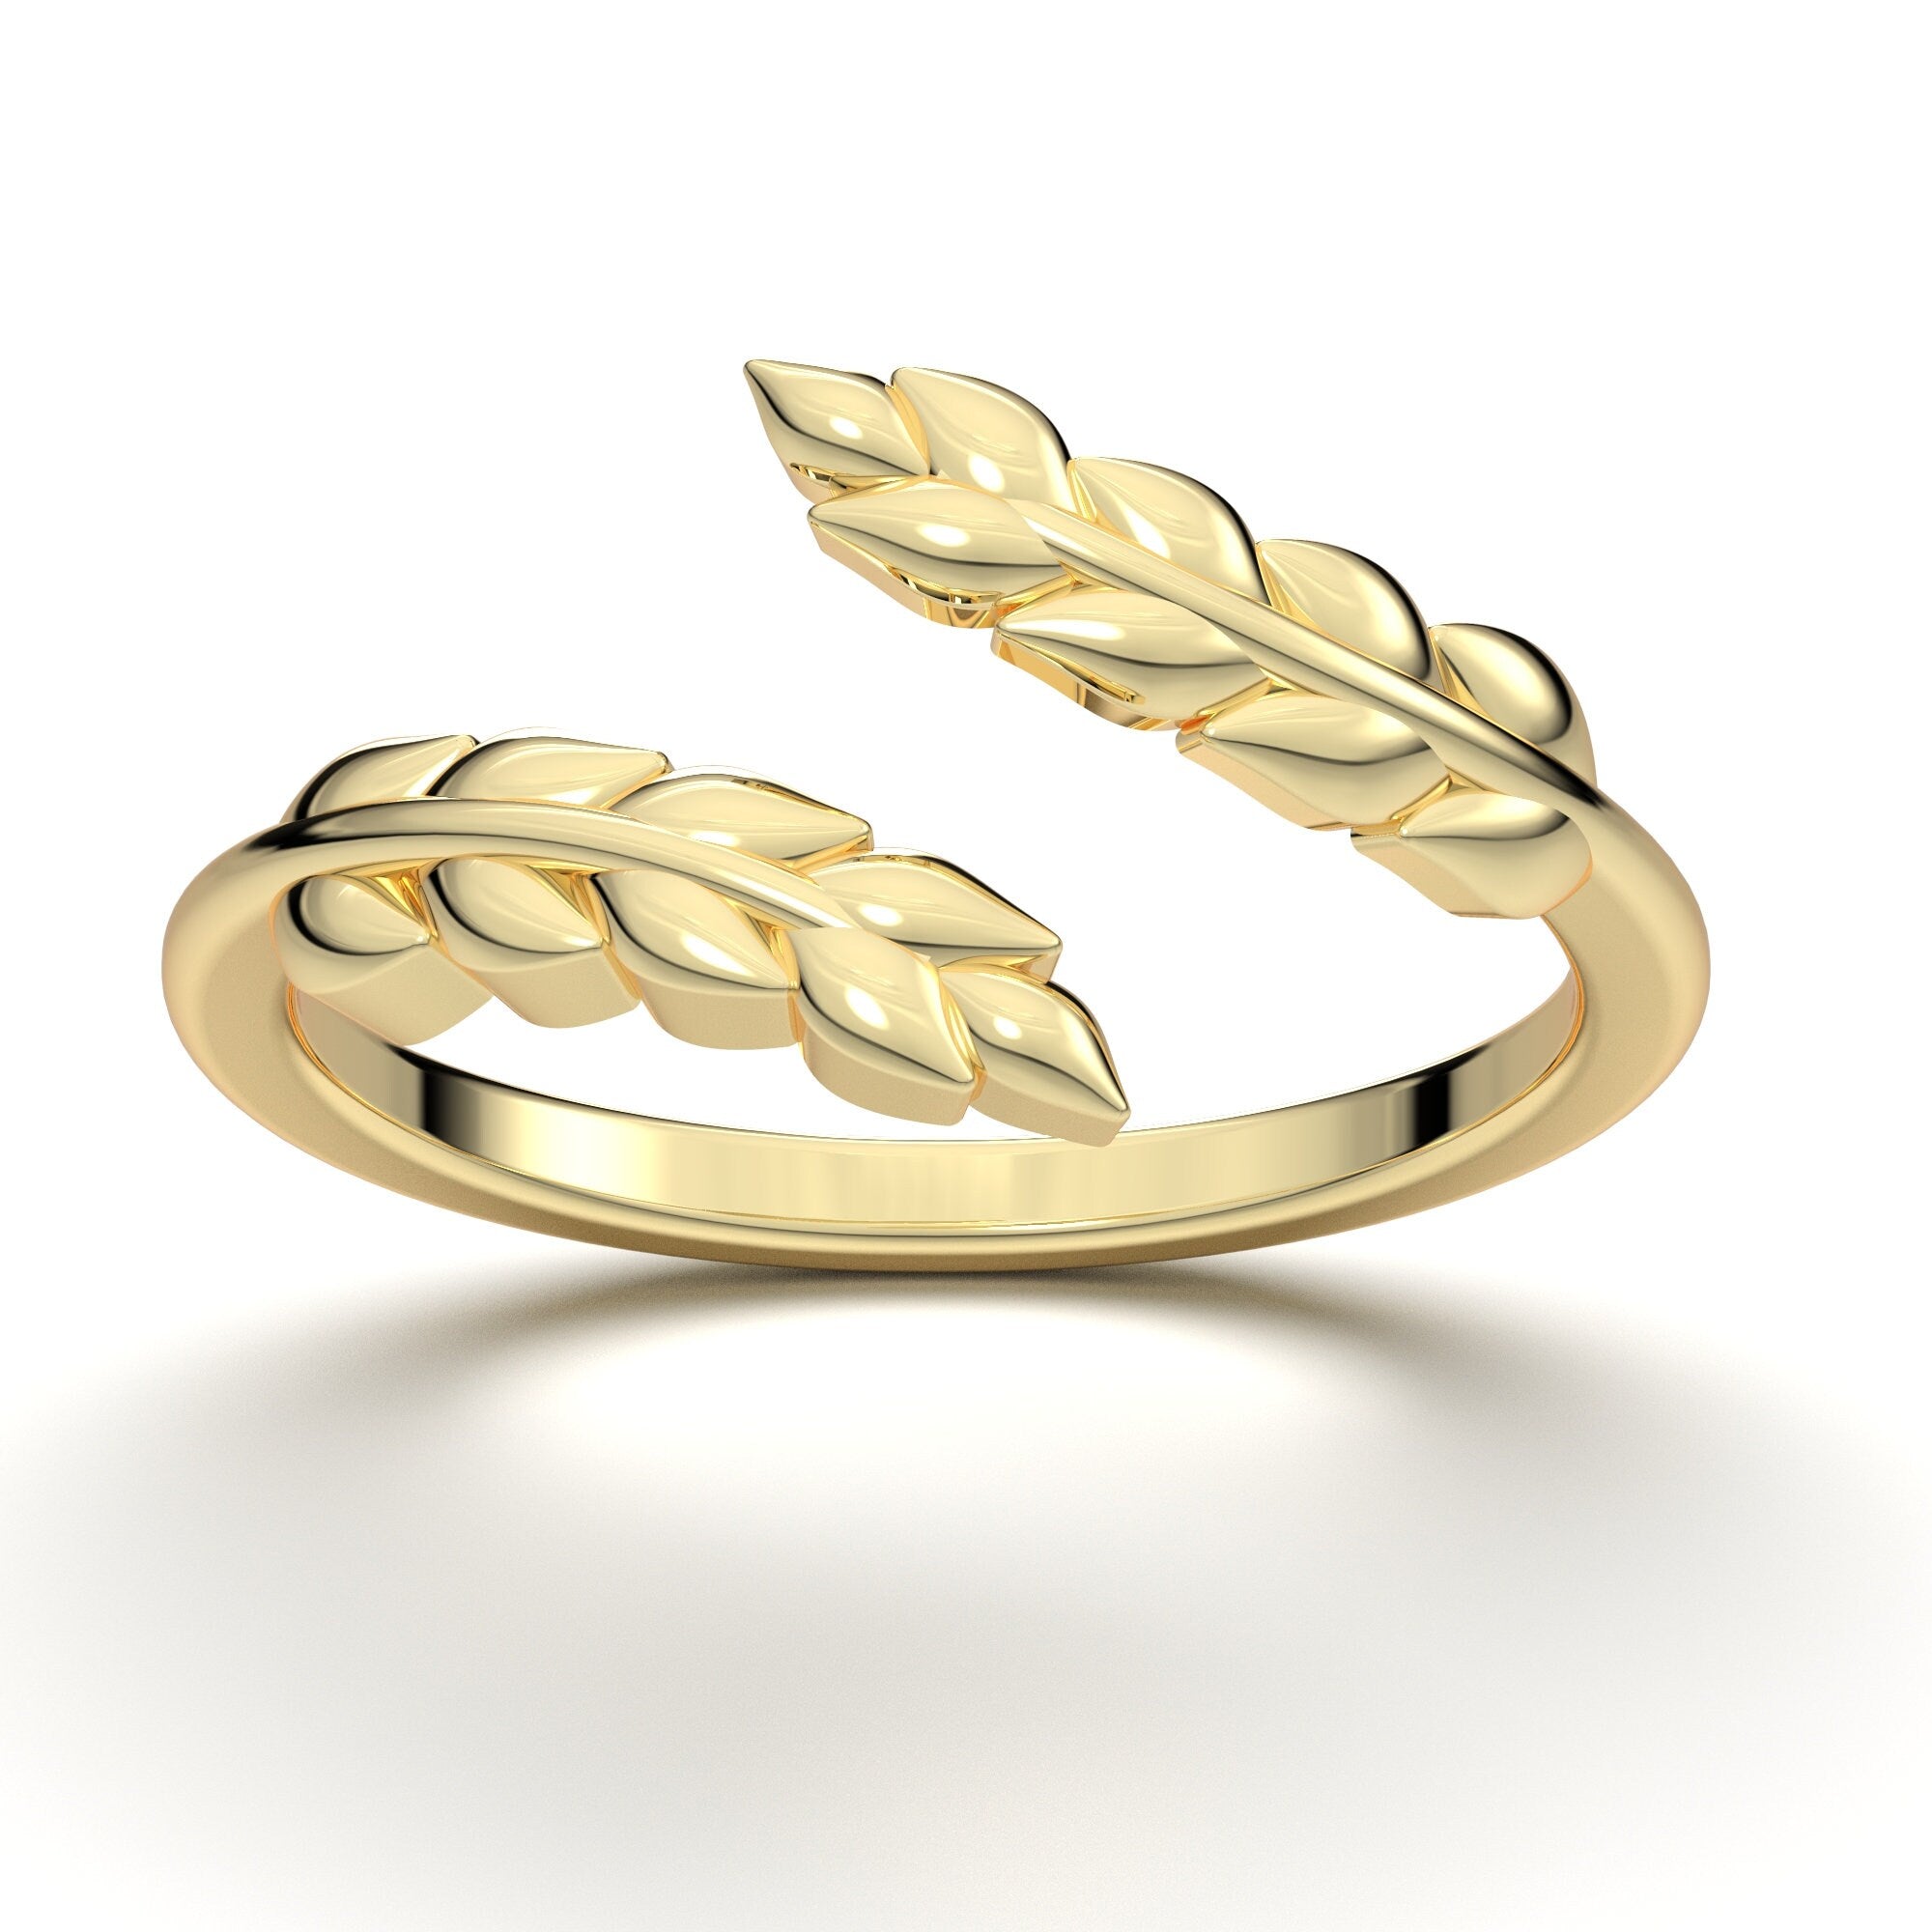 Bubble Band Ring in 14k Gold, Stacking Ring by J'Adorn Designs